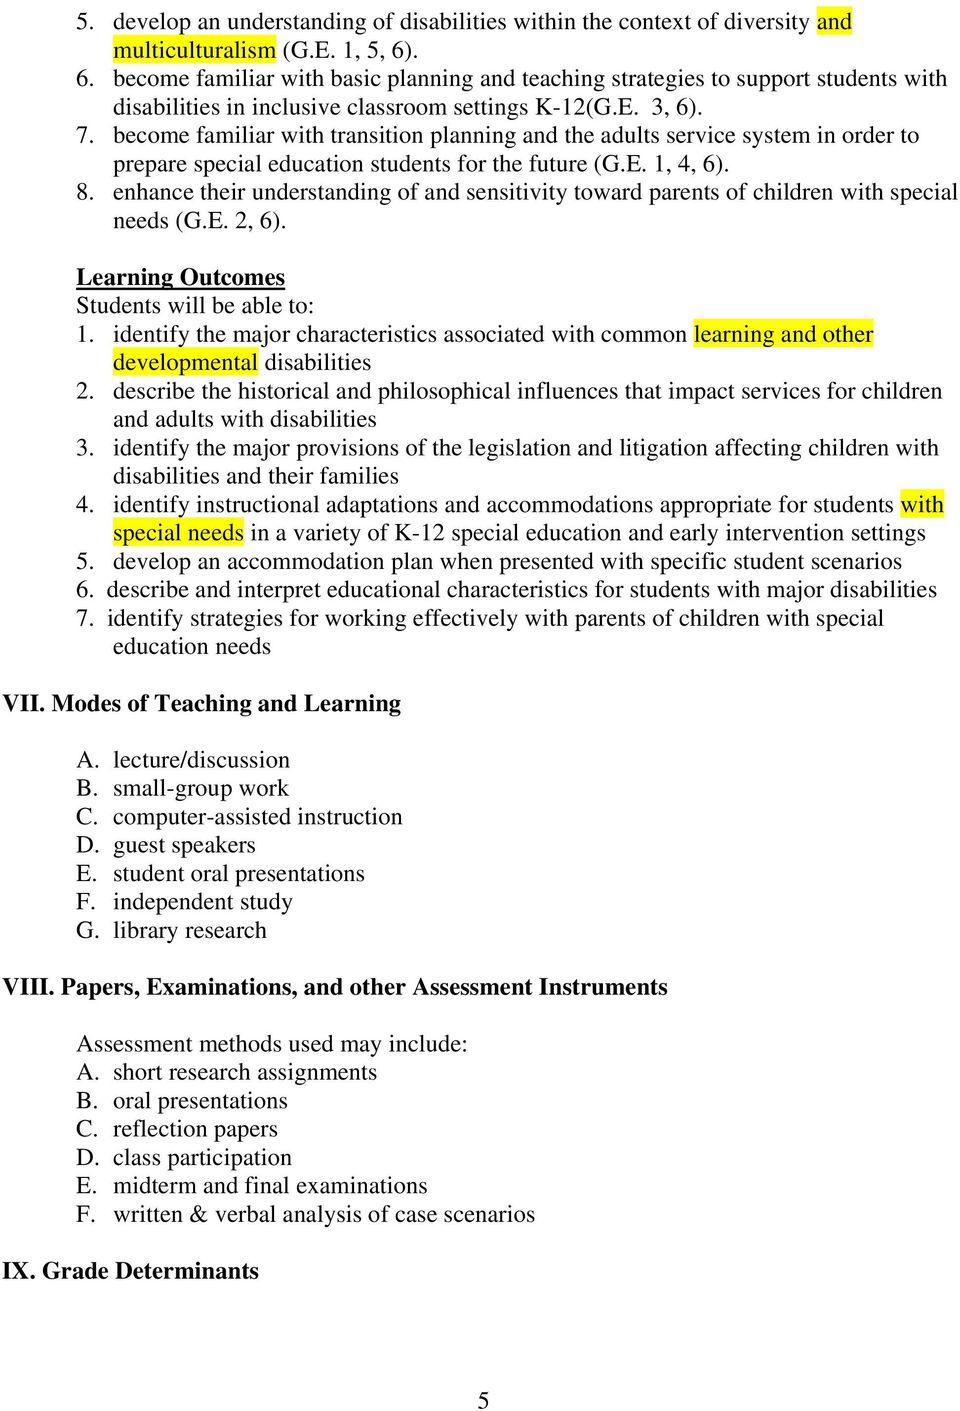 become familiar with transition planning and the adults service system in order to prepare special education students for the future (G.E. 1, 4, 6). 8.